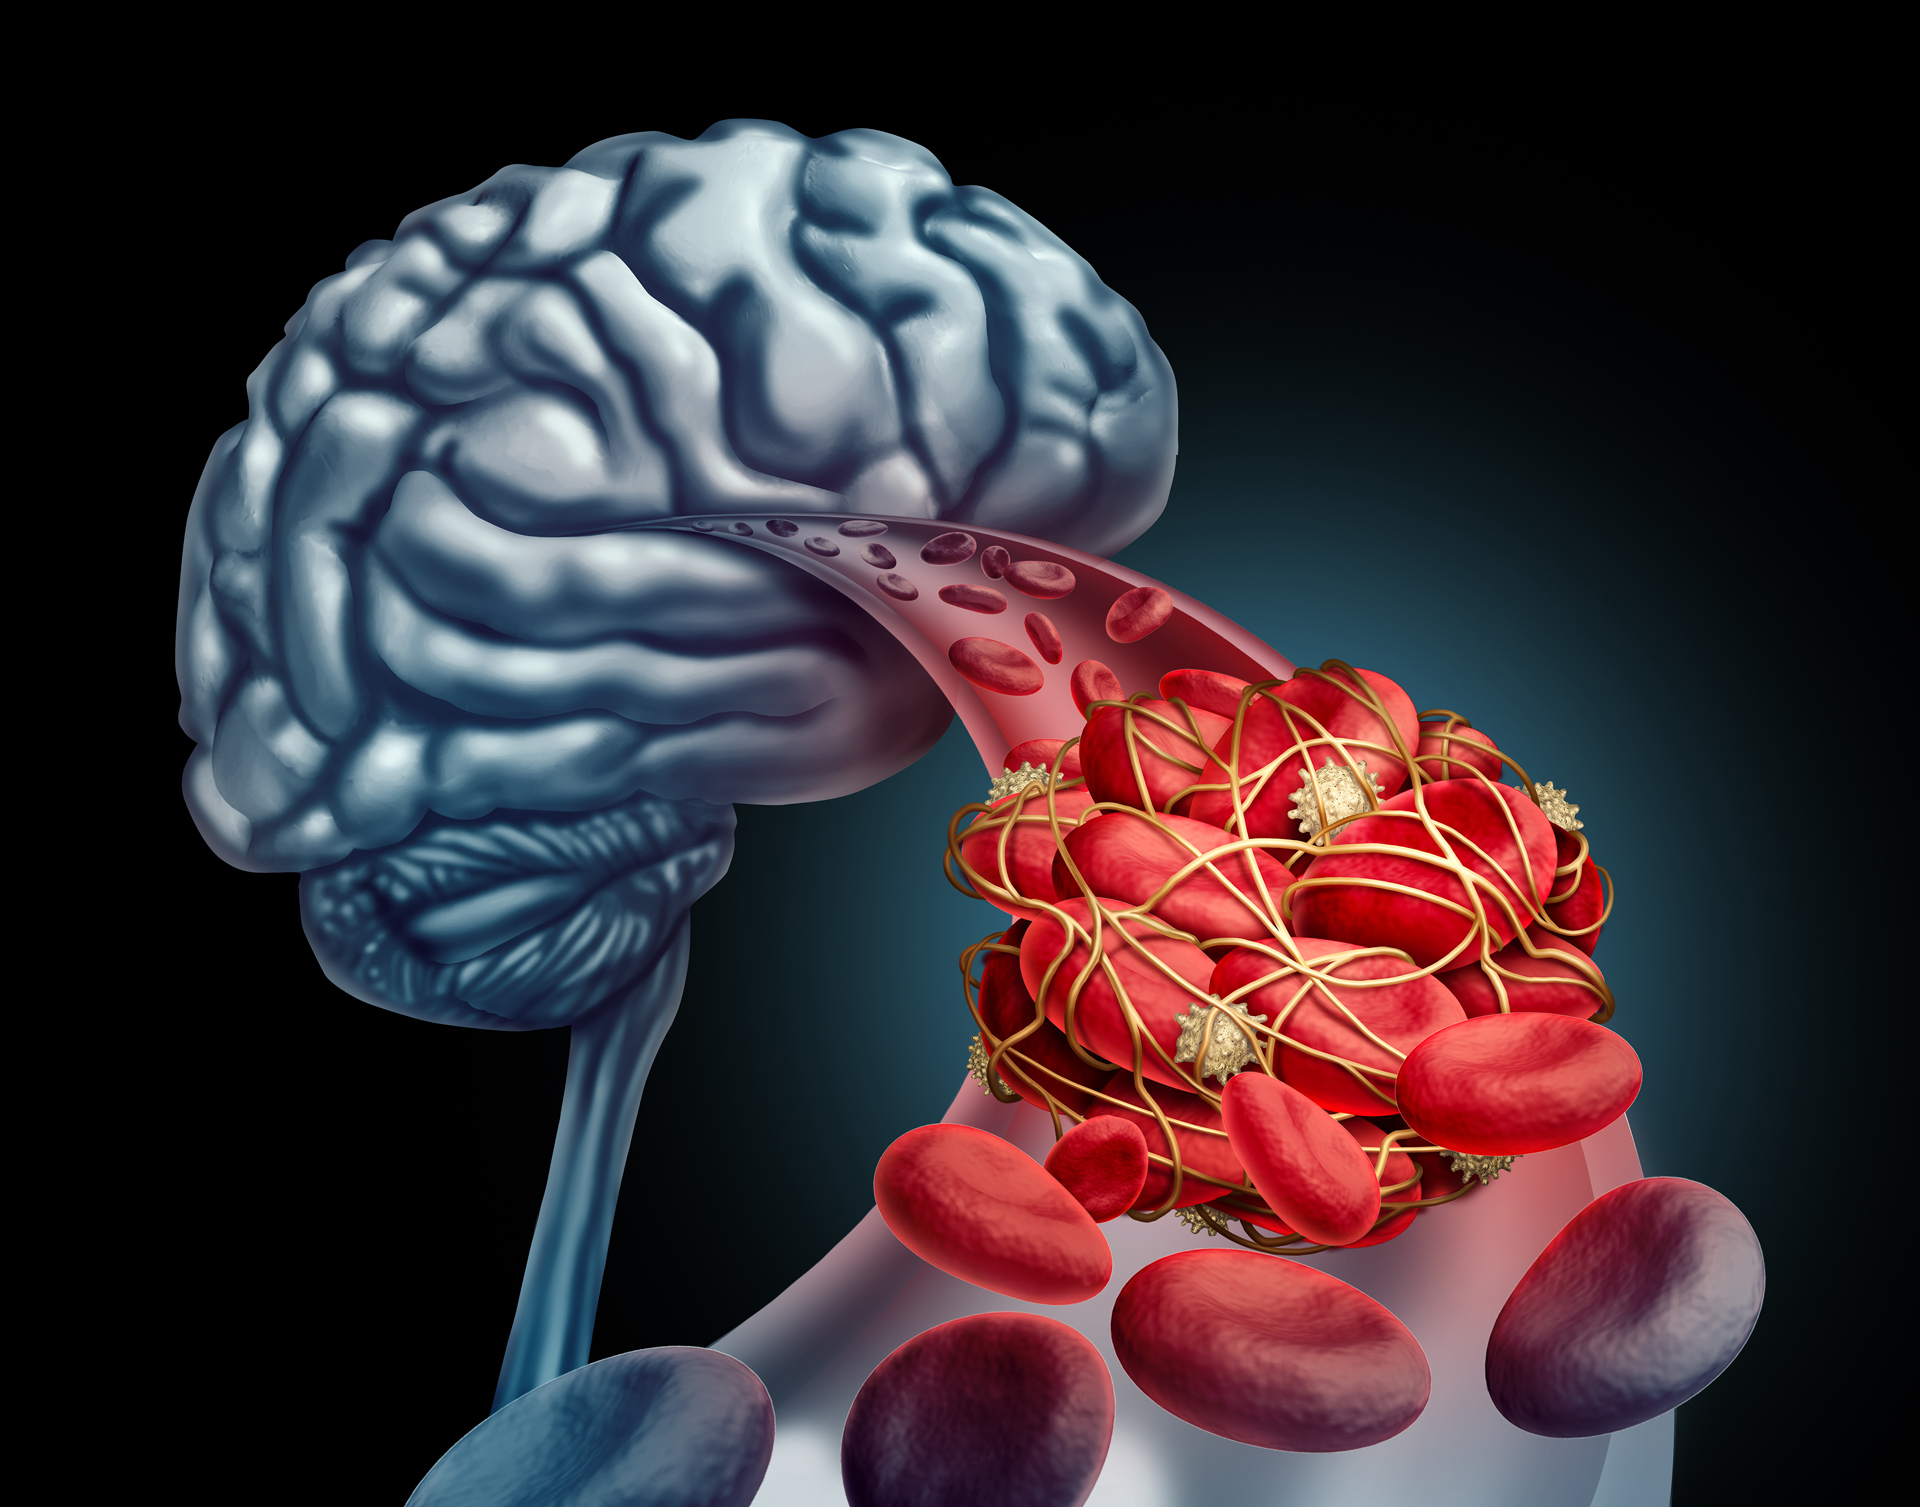 Blood clot brain medical concept as 3D illustration blood cells blocked by an artery blockage thrombus causing a blockage of blood flow to the neurology anatomy in a black background.